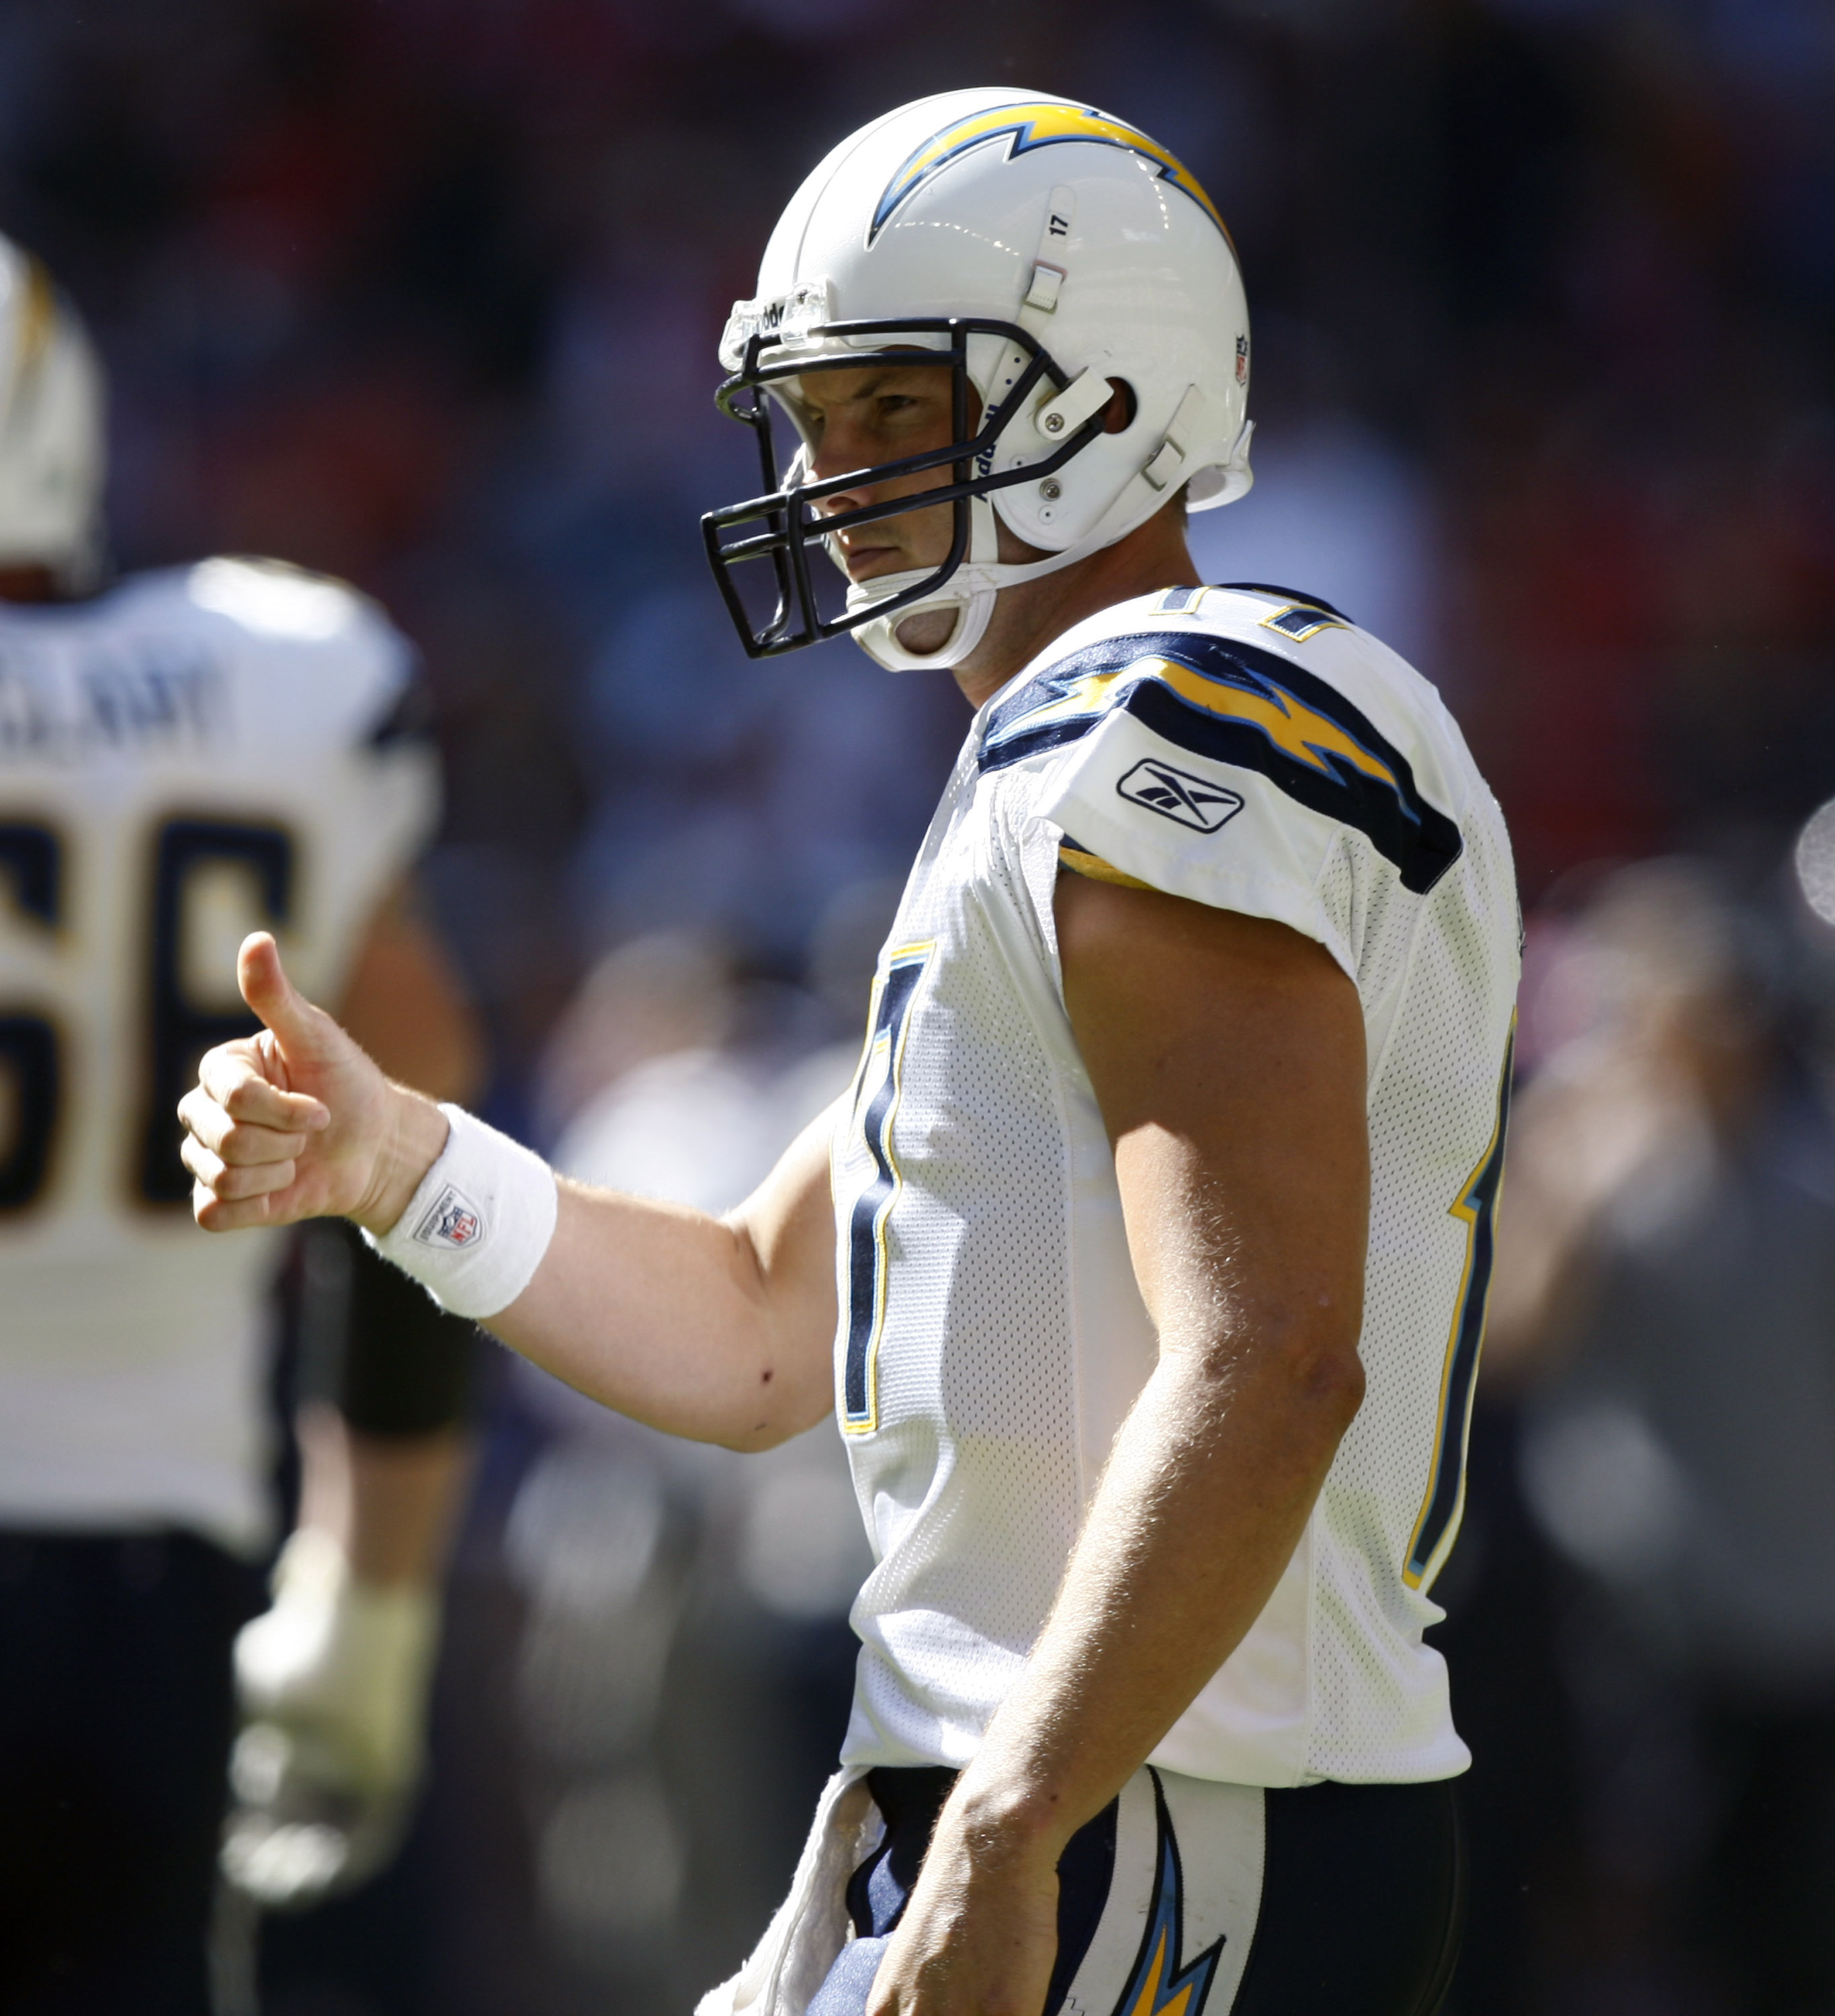 HOUSTON - NOVEMBER 07:  Quarterback Philips #17 of the San Diego Chargers gives a thumbs up to he bench after a touchdown against the Houston Texans at Reliant Stadium on November 7, 2010 in Houston, Texas.  (Photo by Bob Levey/Getty Images)